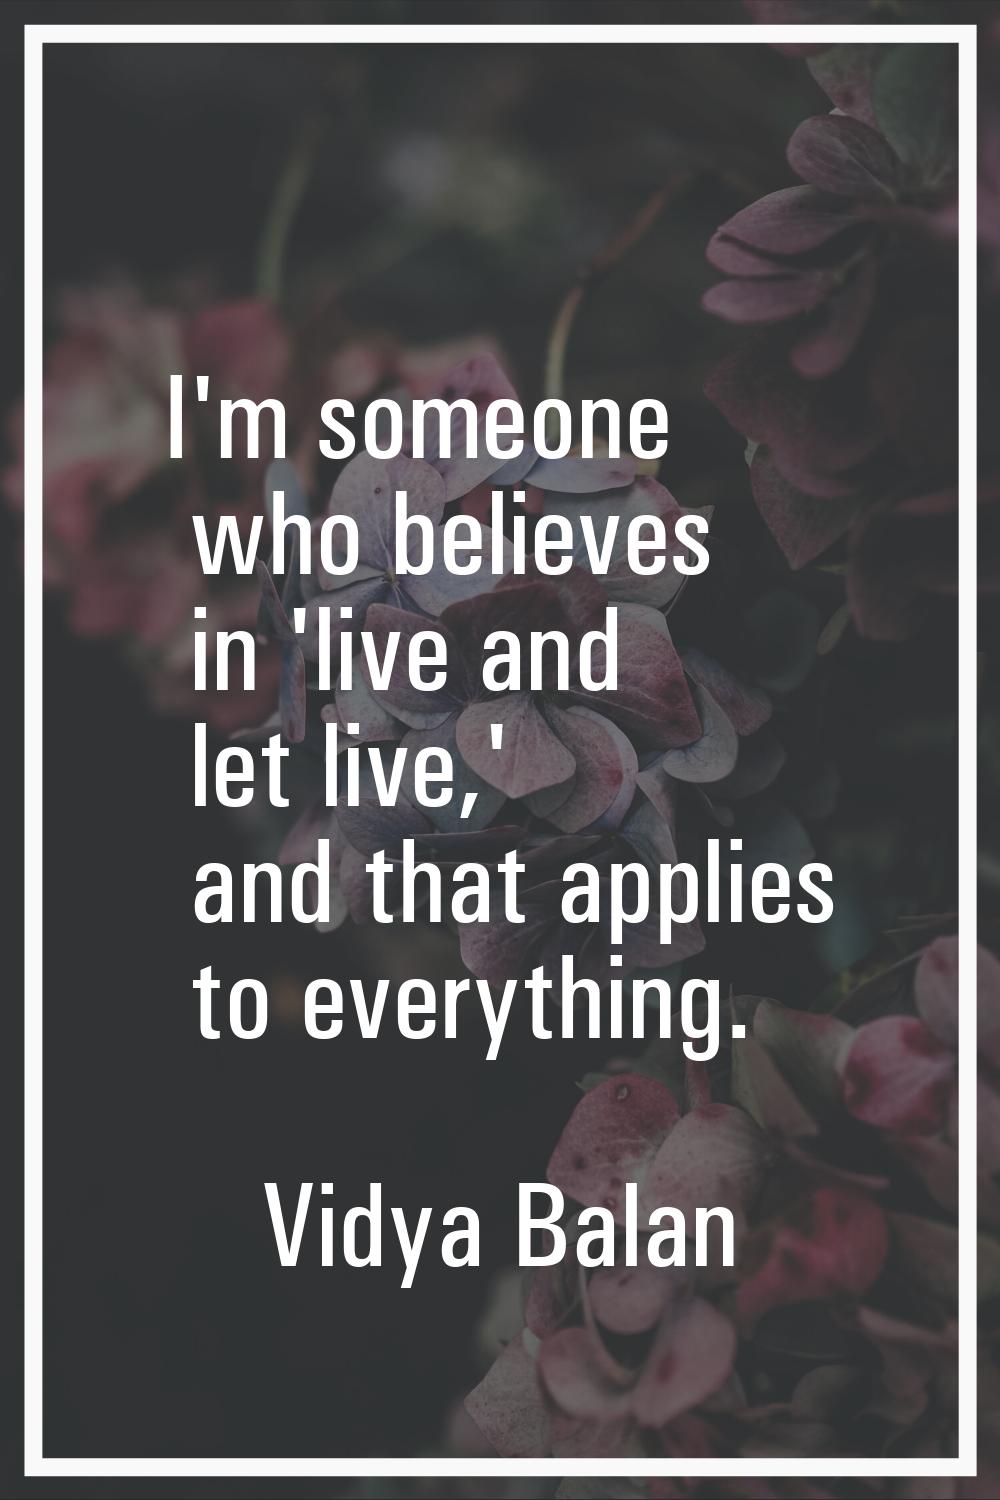 I'm someone who believes in 'live and let live,' and that applies to everything.